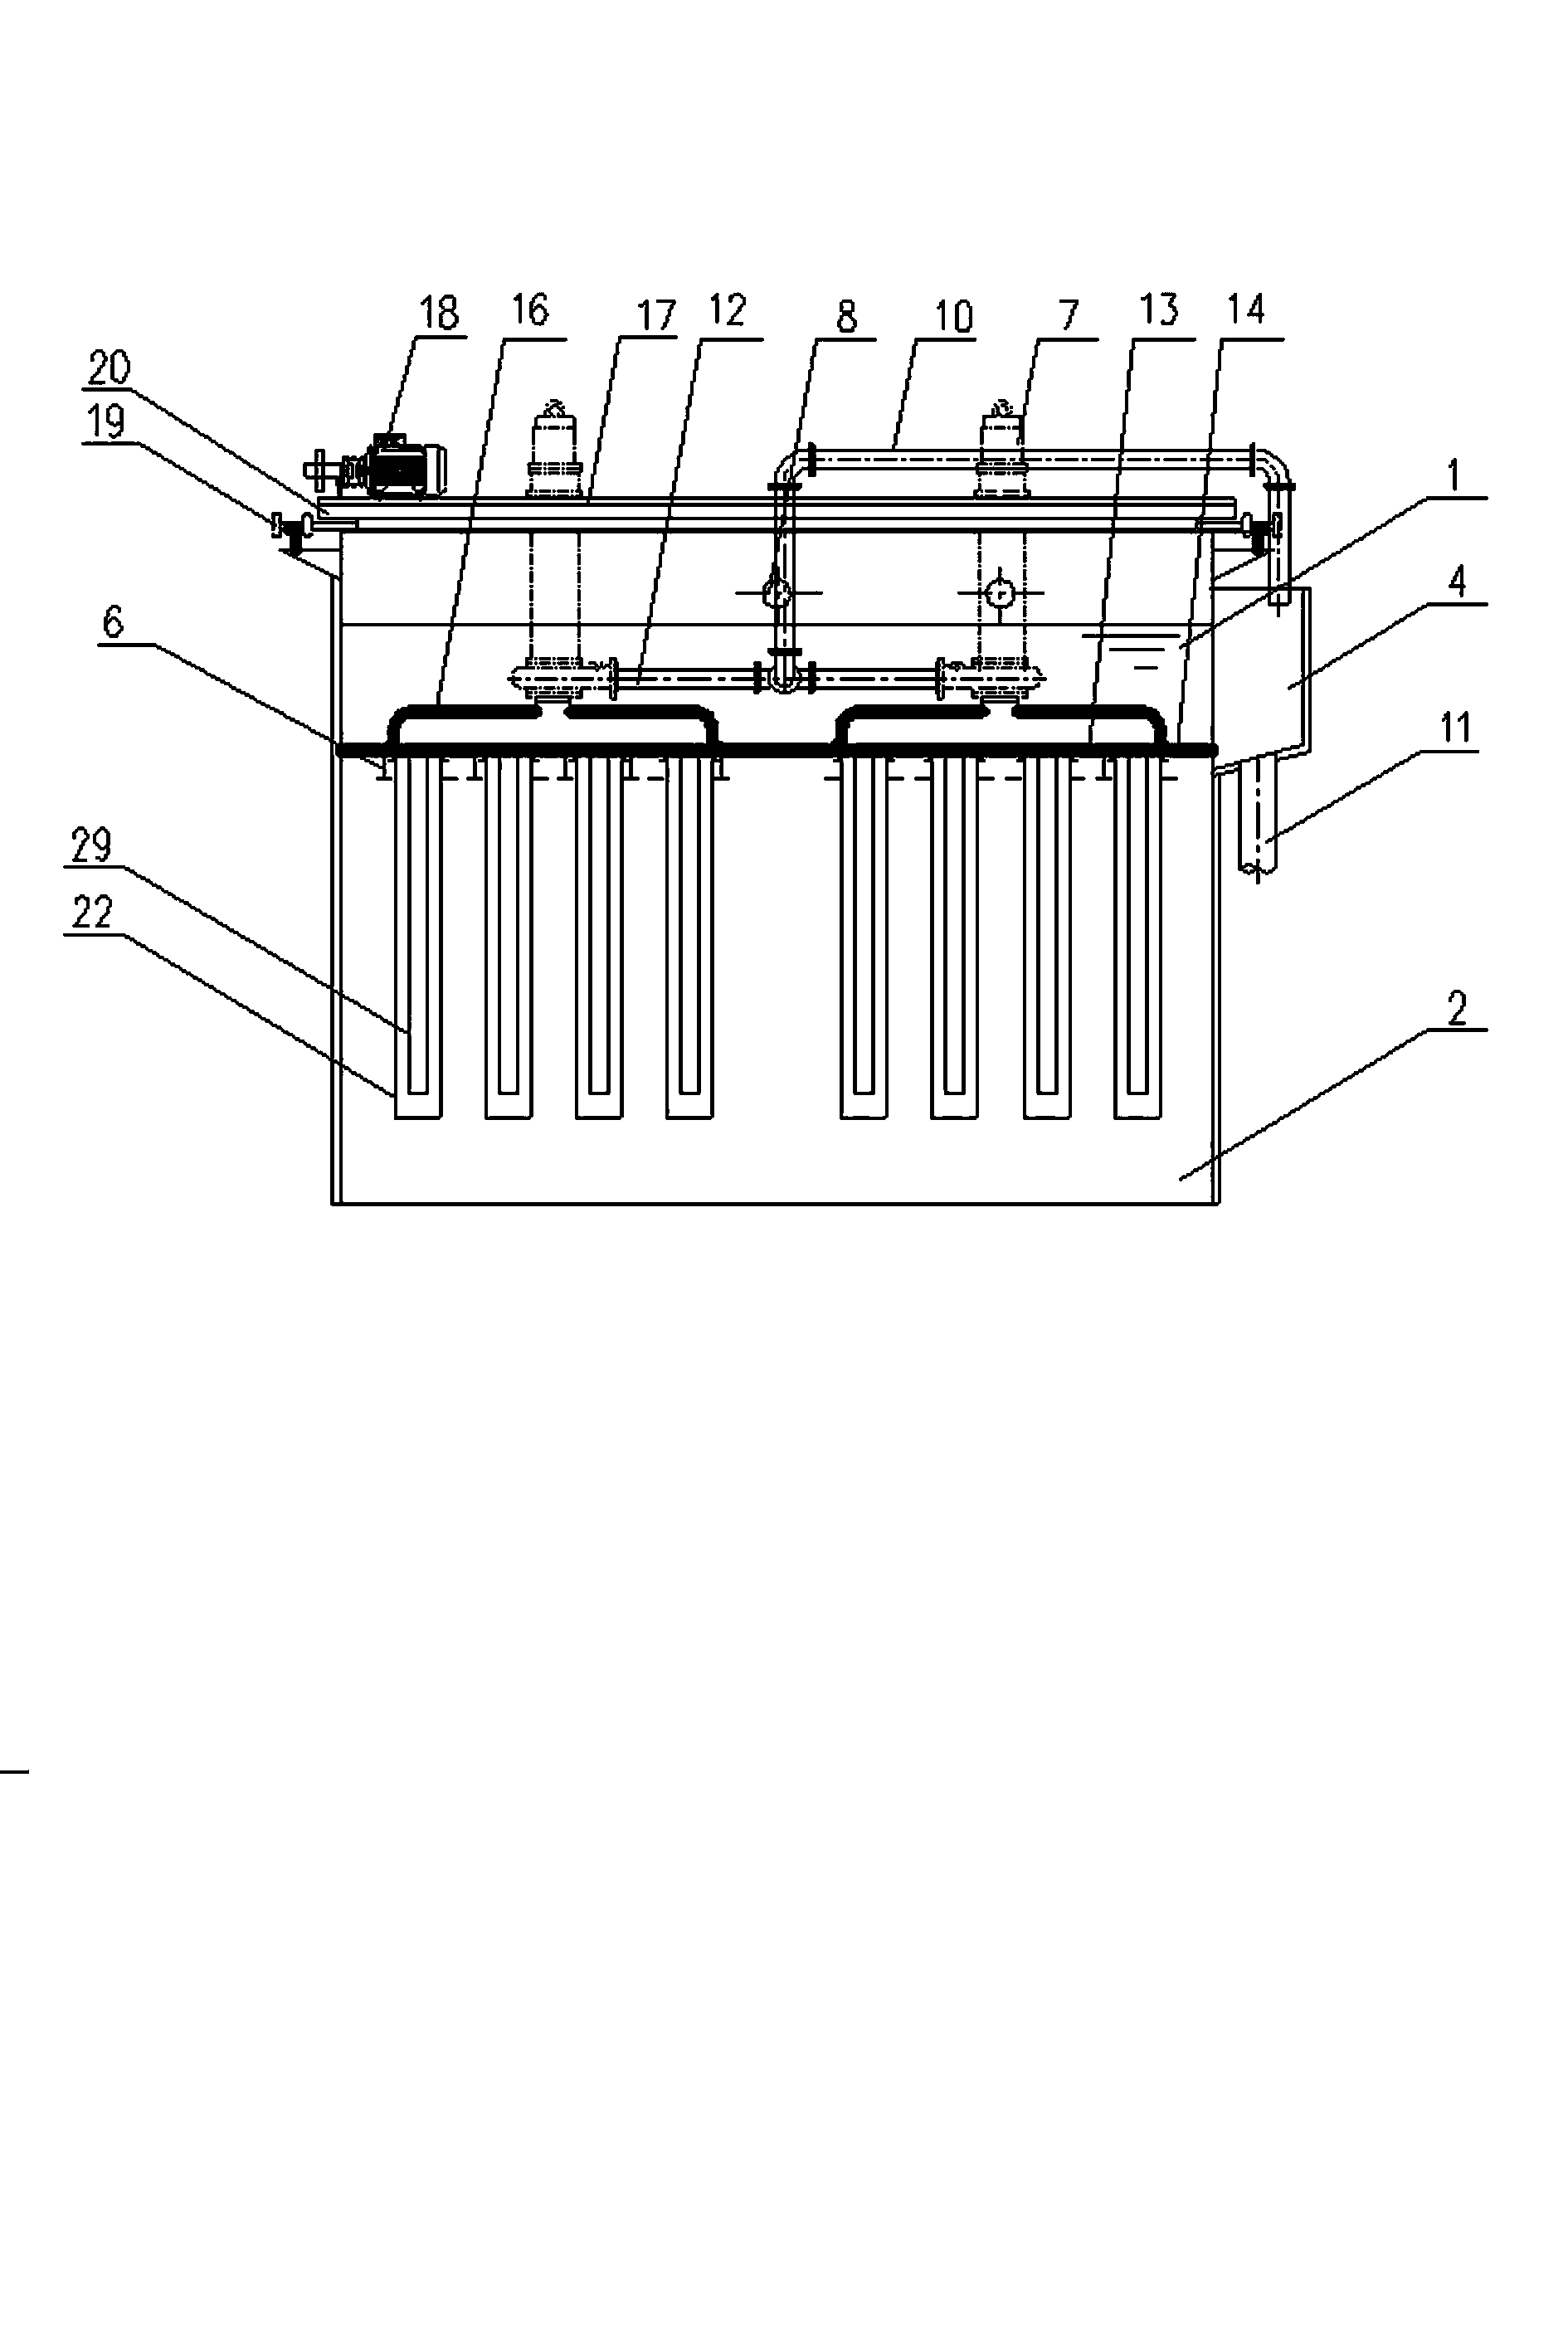 Filter-cloth filter for water treatment